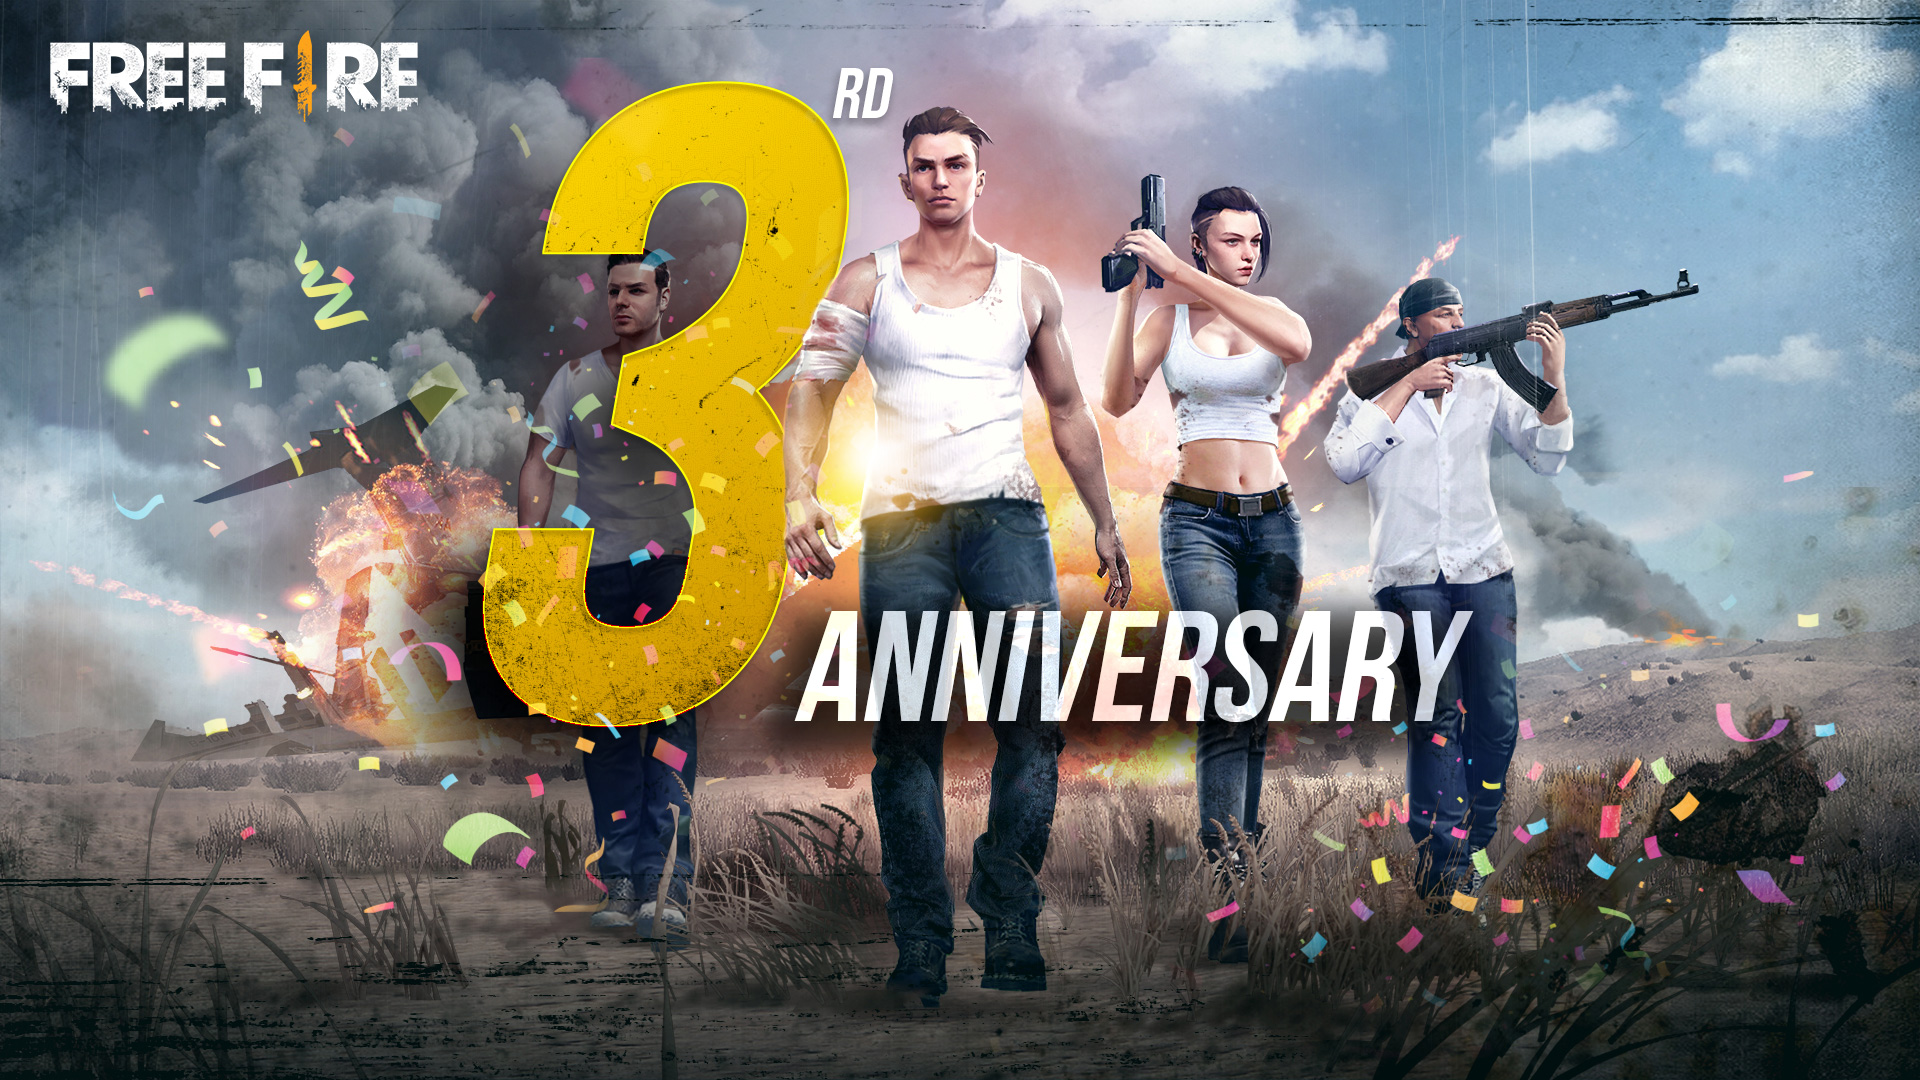 Free Fire 3rd Anniversary: Missions and rewards explained